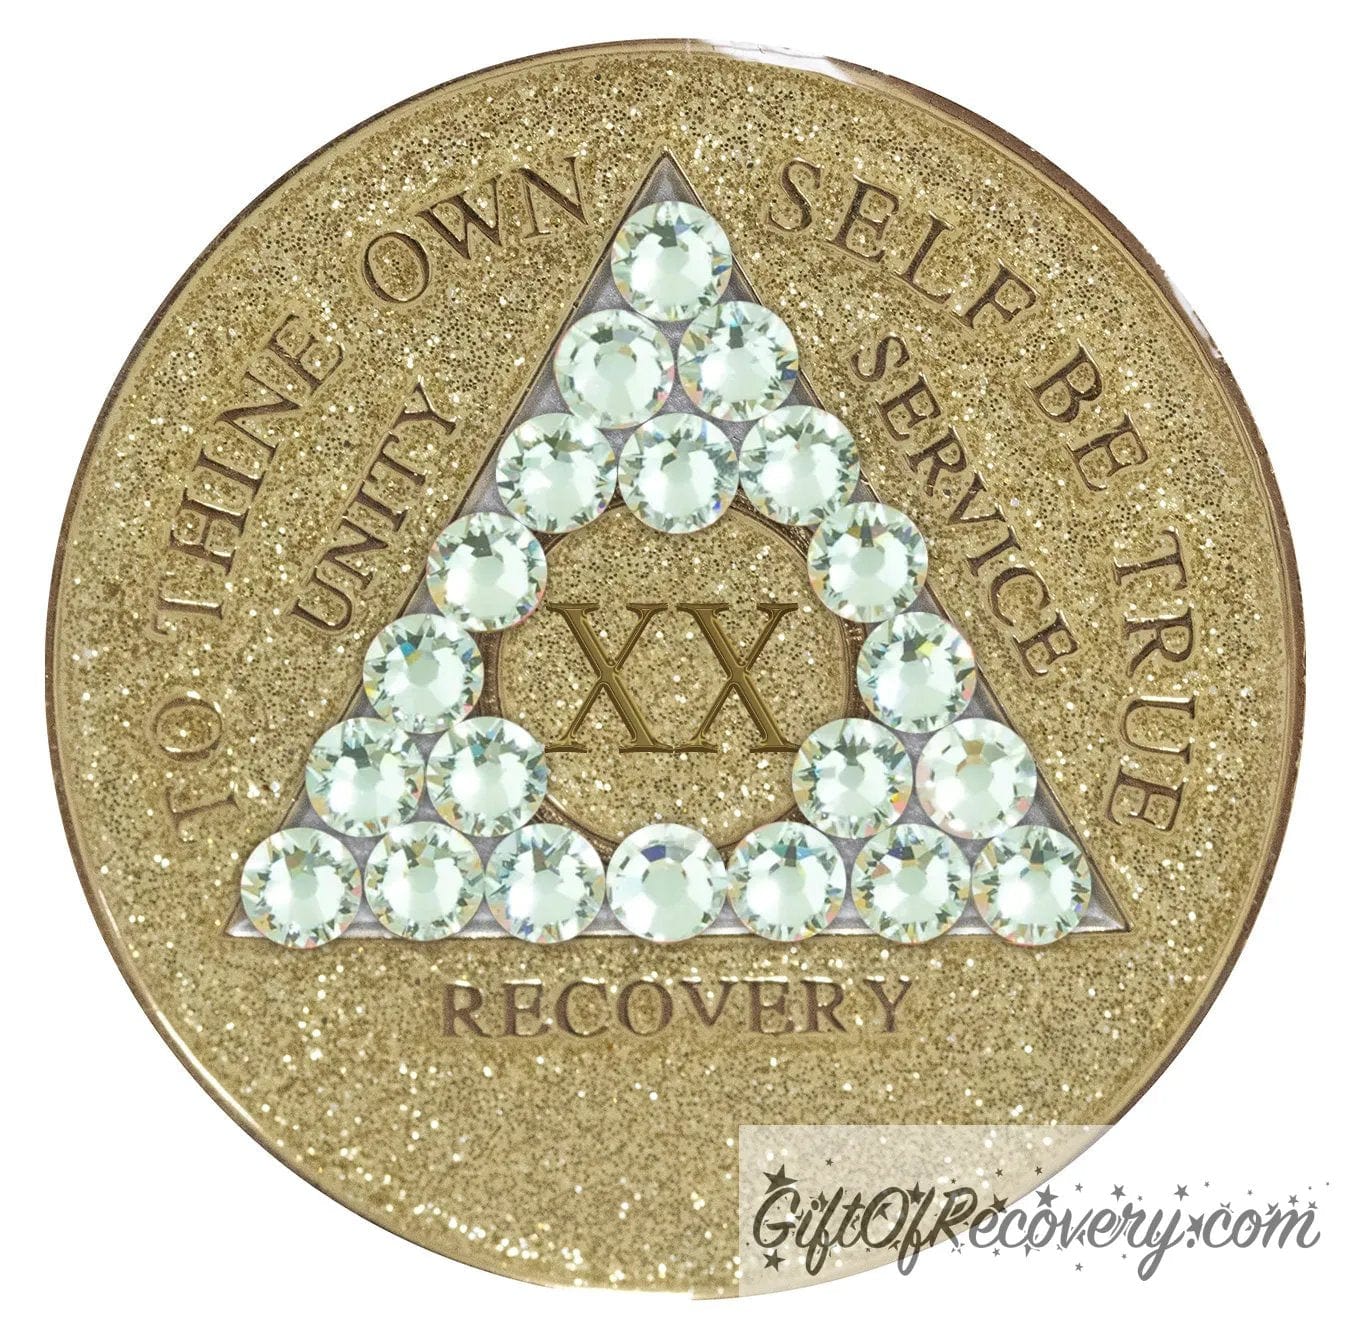 20 year AA medallion in gold glitter with twenty-one genuine diamond CZ crystals in the shape of a triangle, symbolizing transformation under pressure, to thine own self be true, unity, service, recovery and roman numeral are embossed with 14k gold-plated brass along with outer rim, sealed in a chip and scratch-resistant resin giving it a beautiful glossy look.